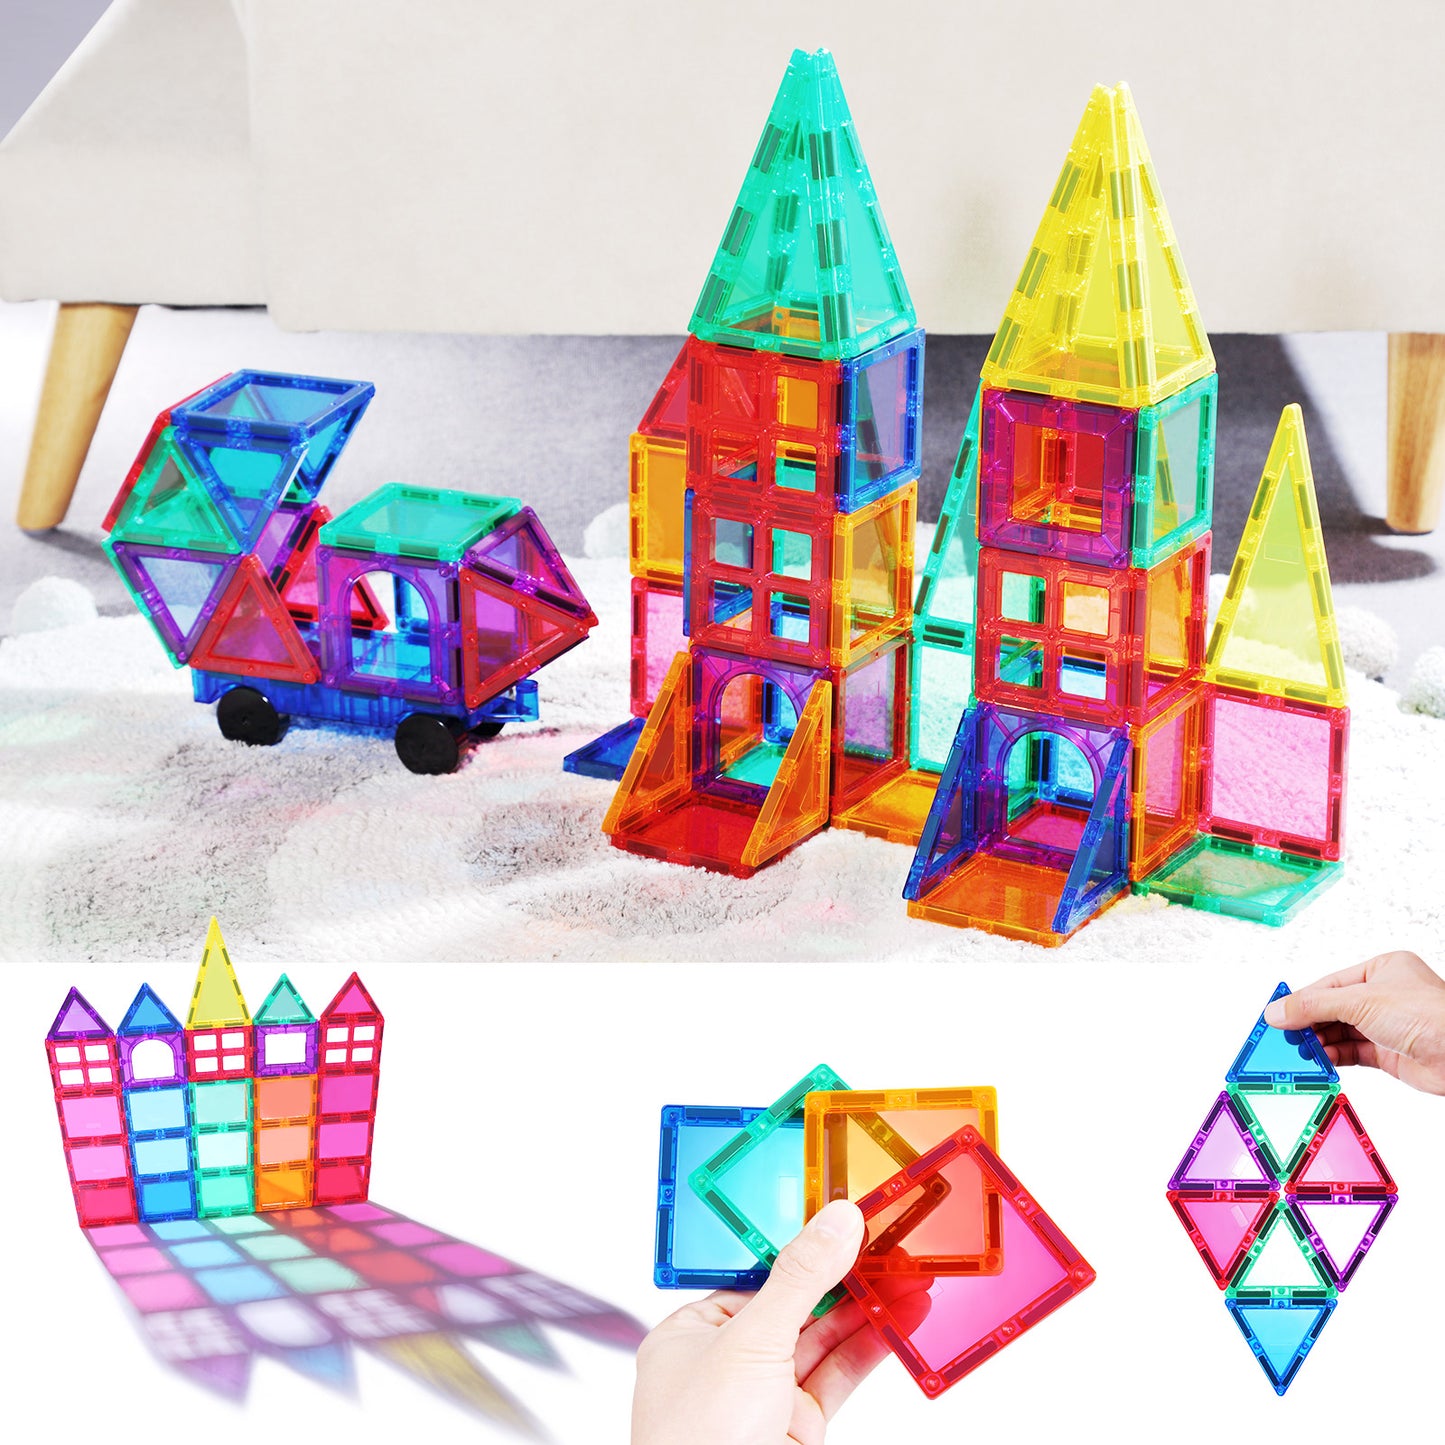 PLUMIA Magnetic Tiles for Kids 3D Magnet Building Tiles Set STEM Learning Toys Magnetic Toys Gift for 3+ Year Old Boys and Girls